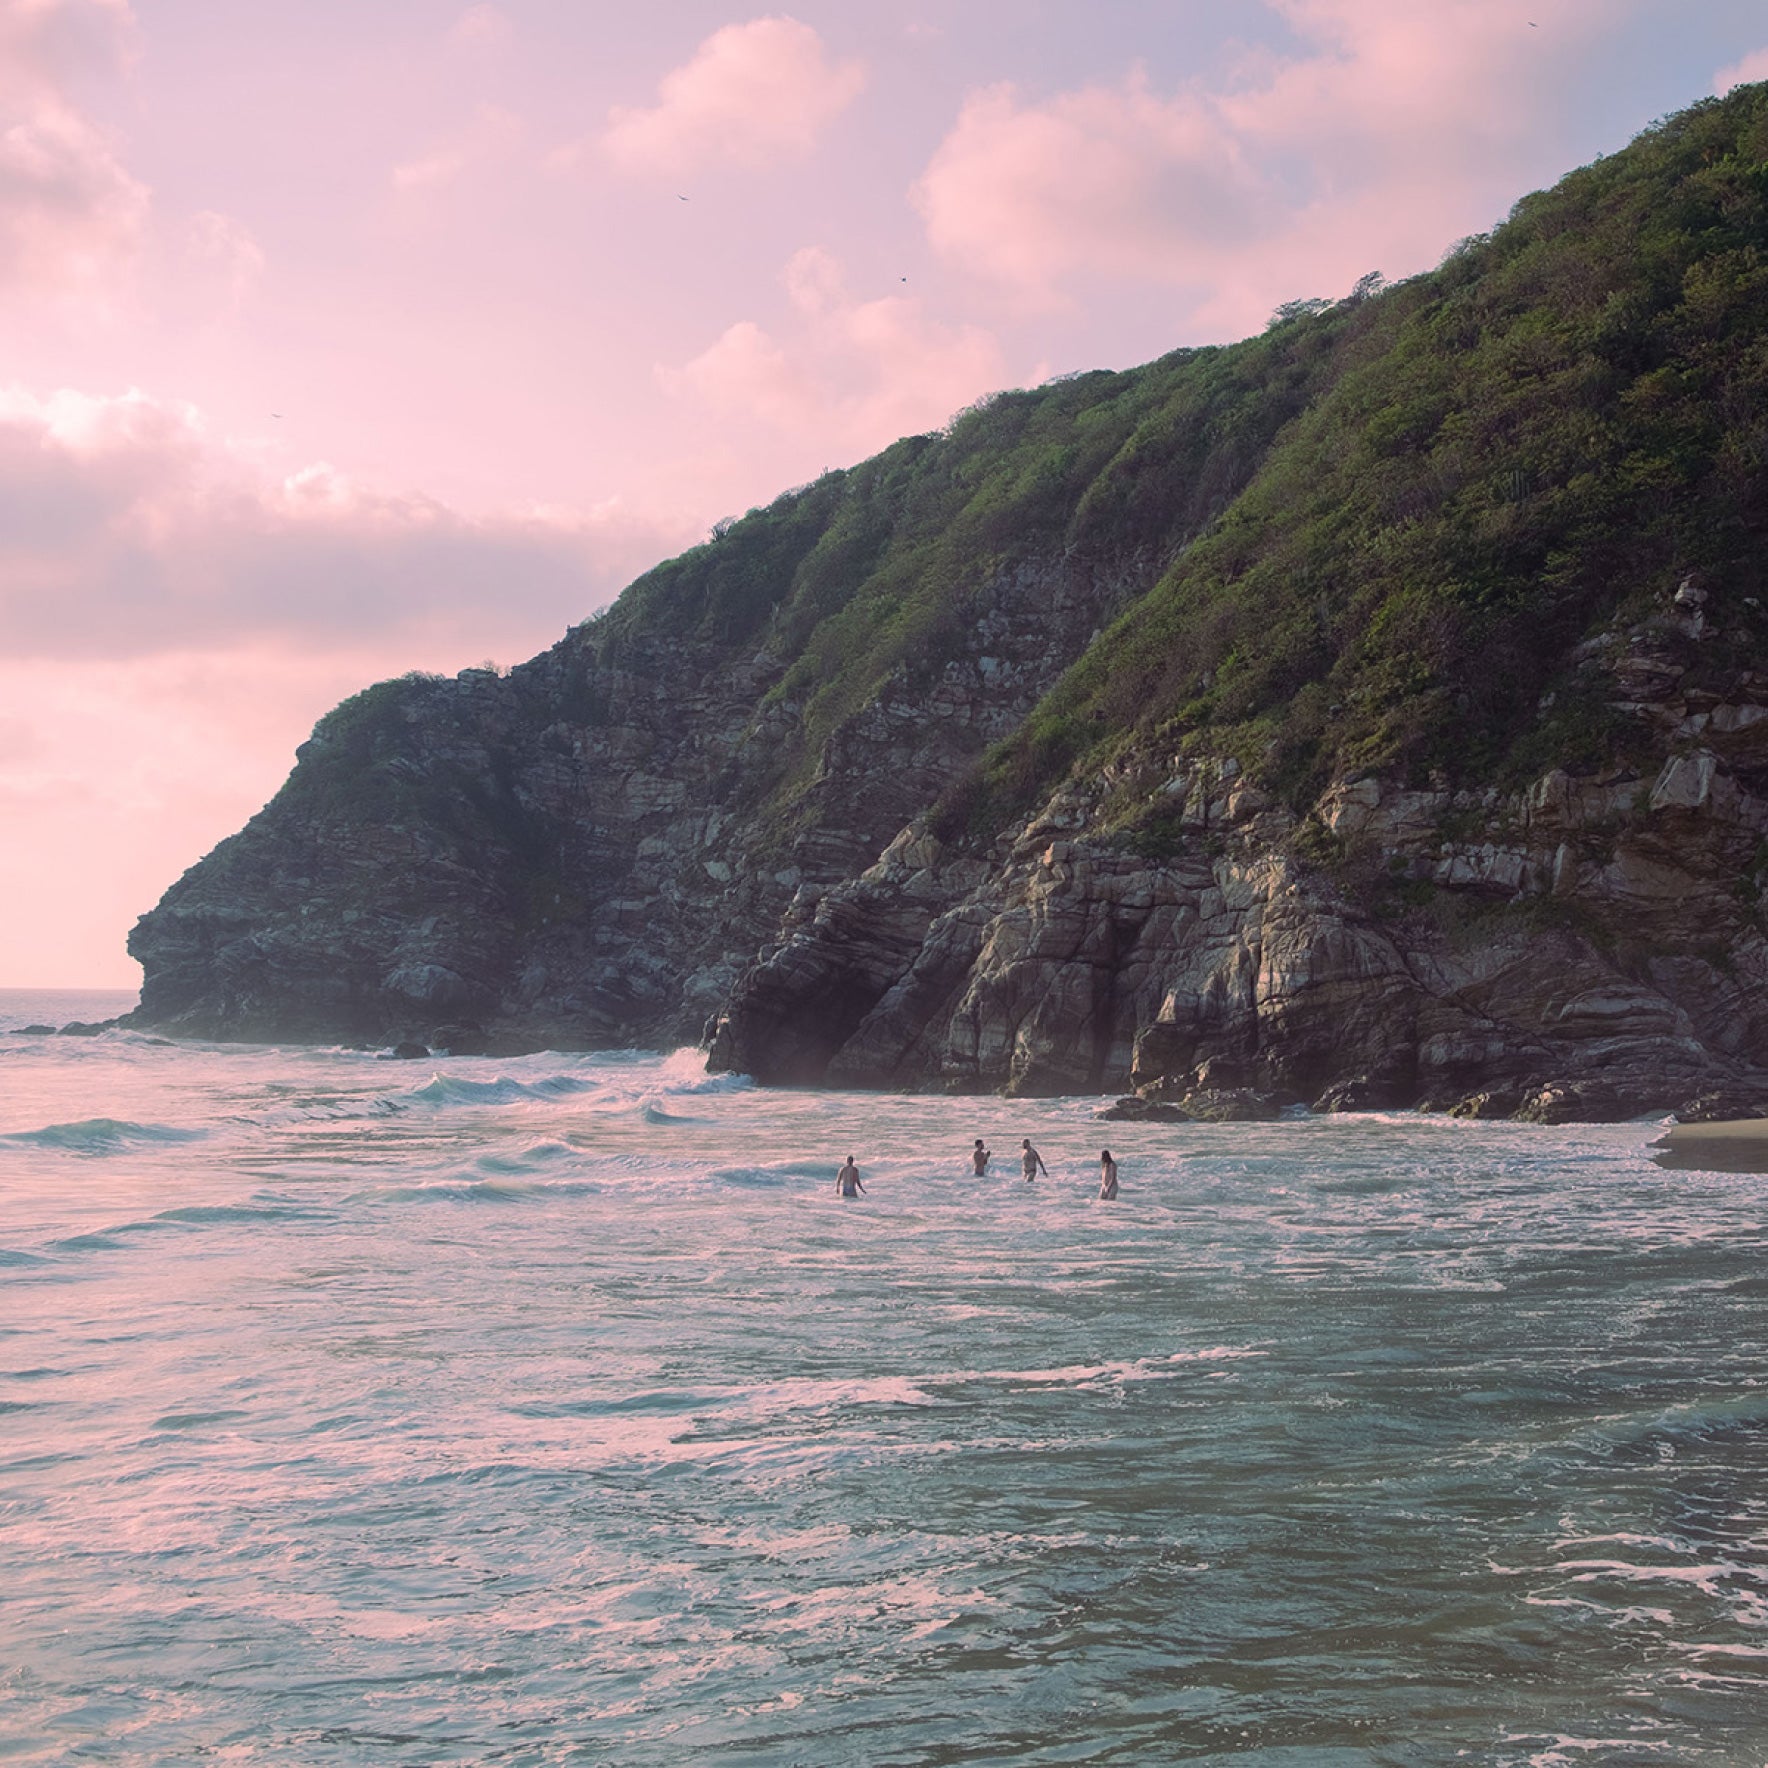 individuals wading into the ocean alongside a steep rocky coastline covered in shrubs